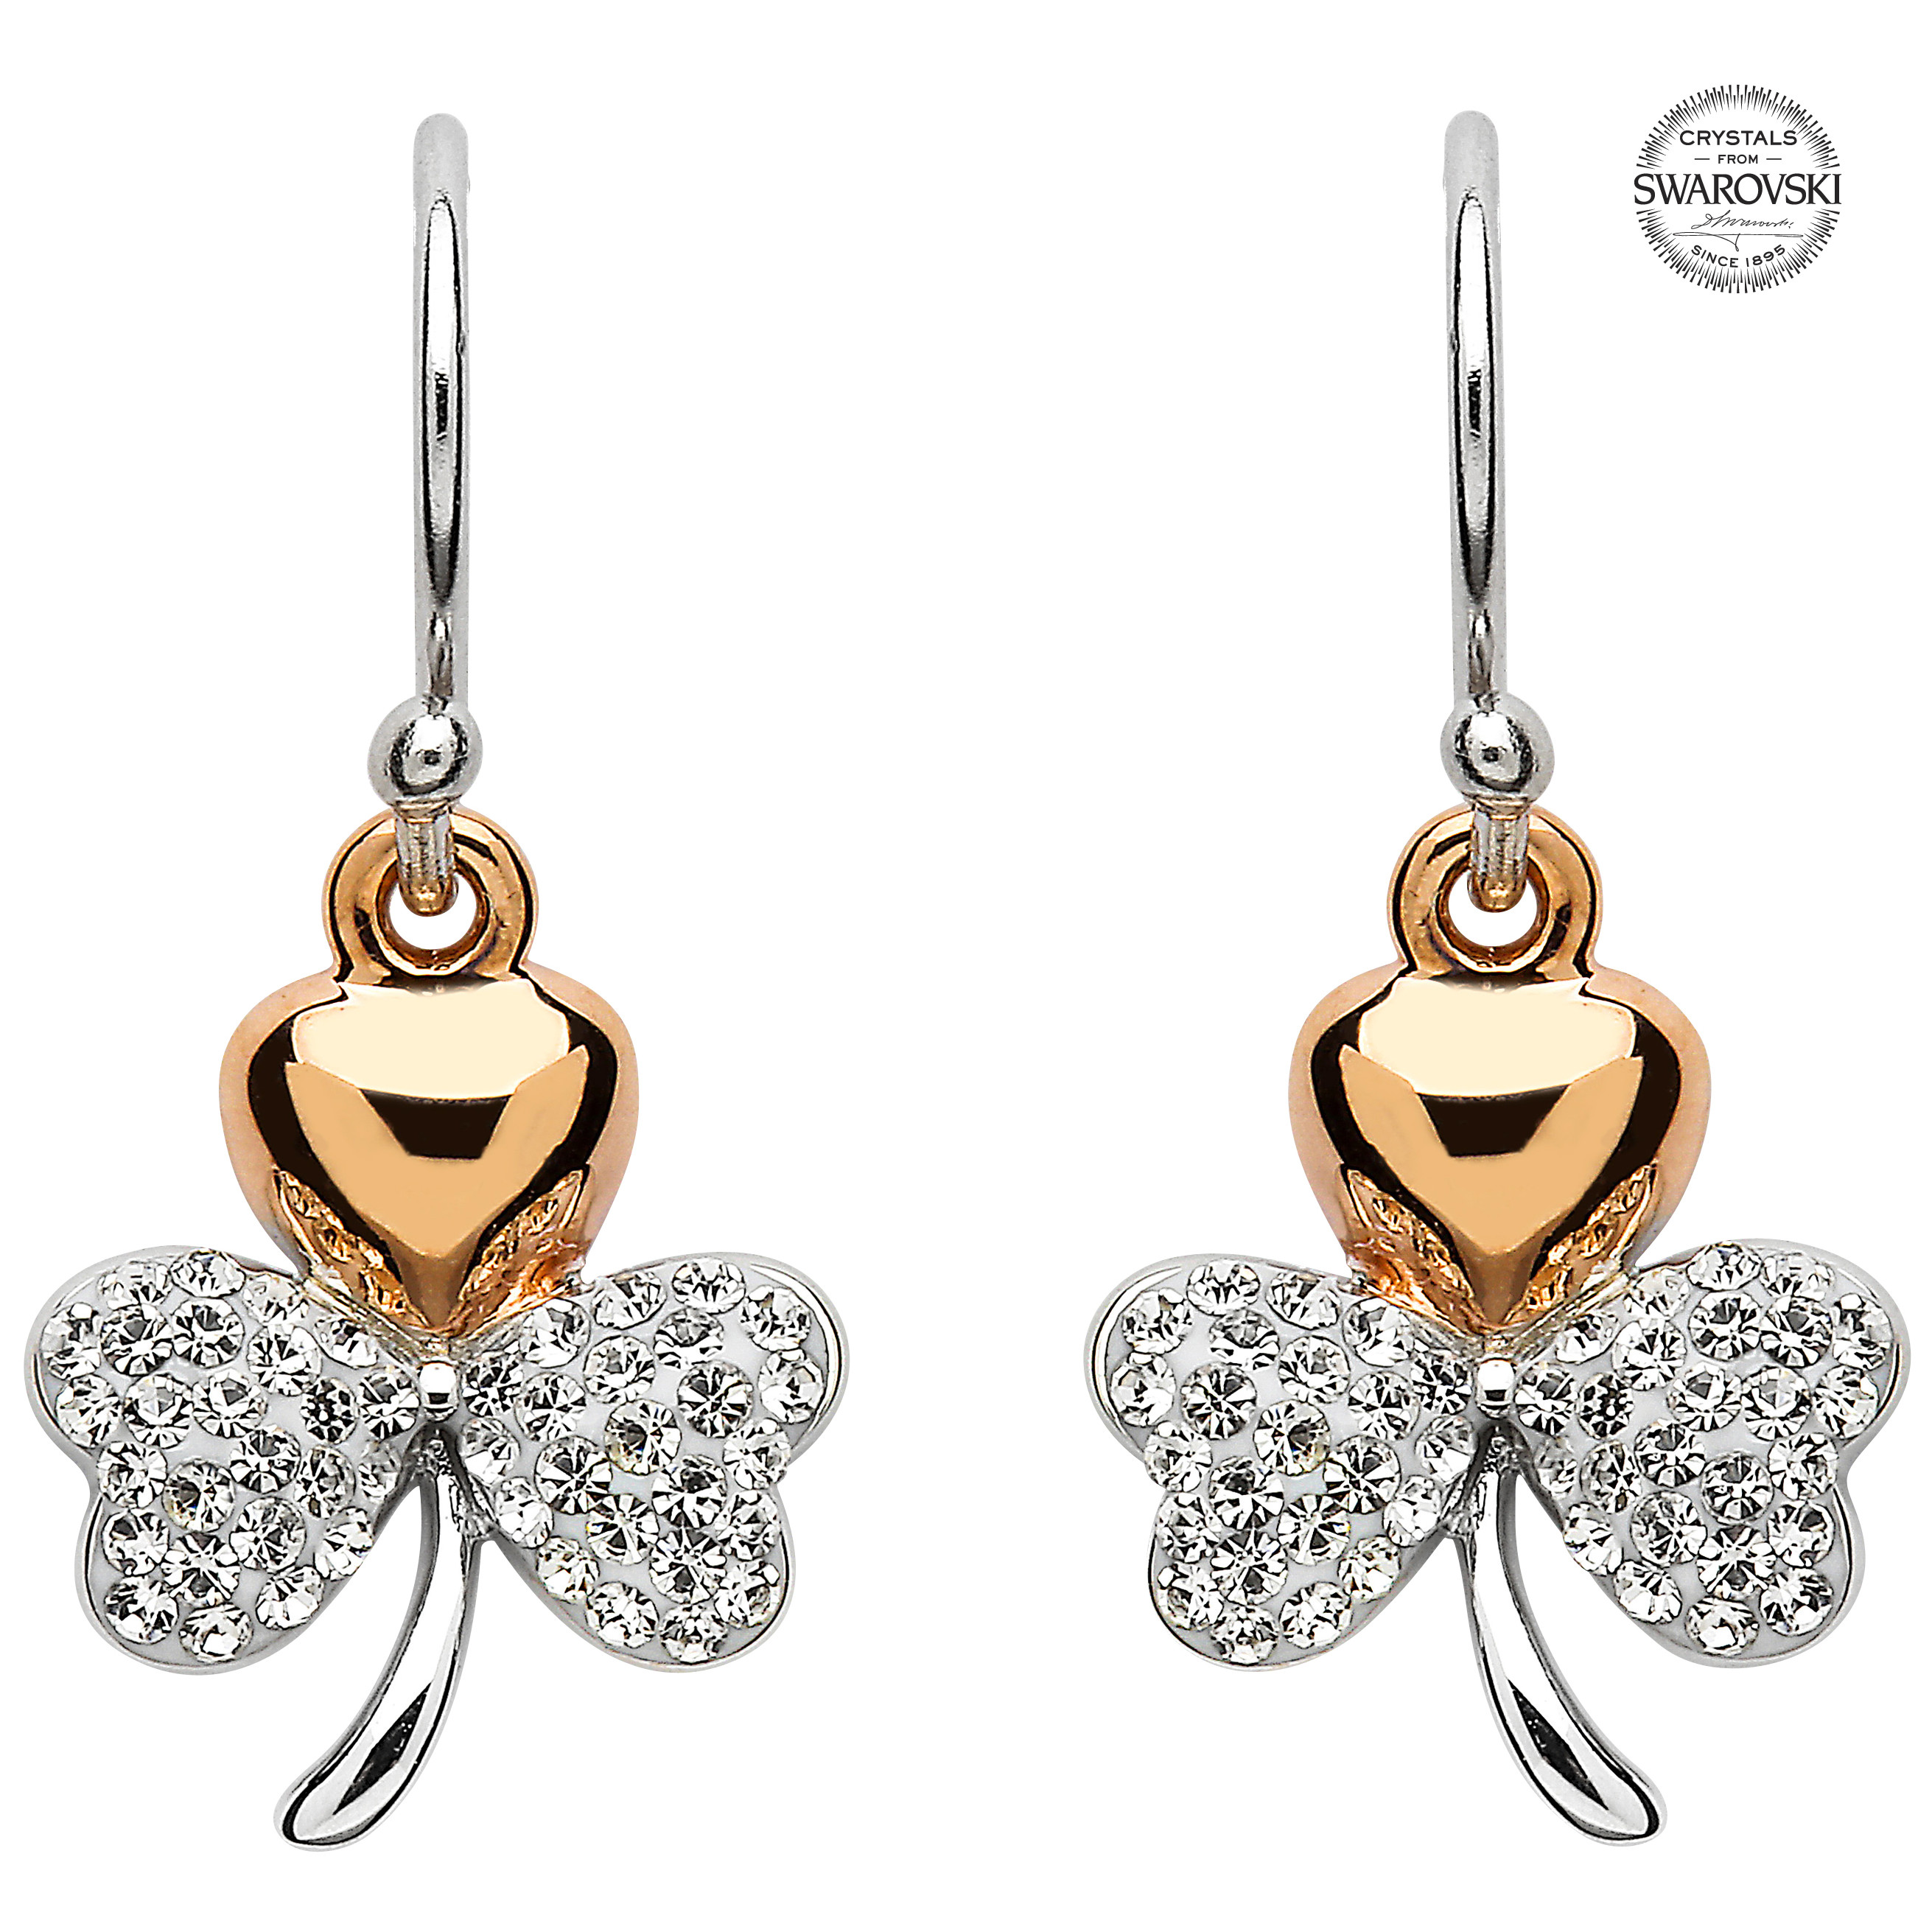 Product image for Shamrock Earrings - Gold Plated Shamrock Earrings Encrusted with Swarovski Crystals